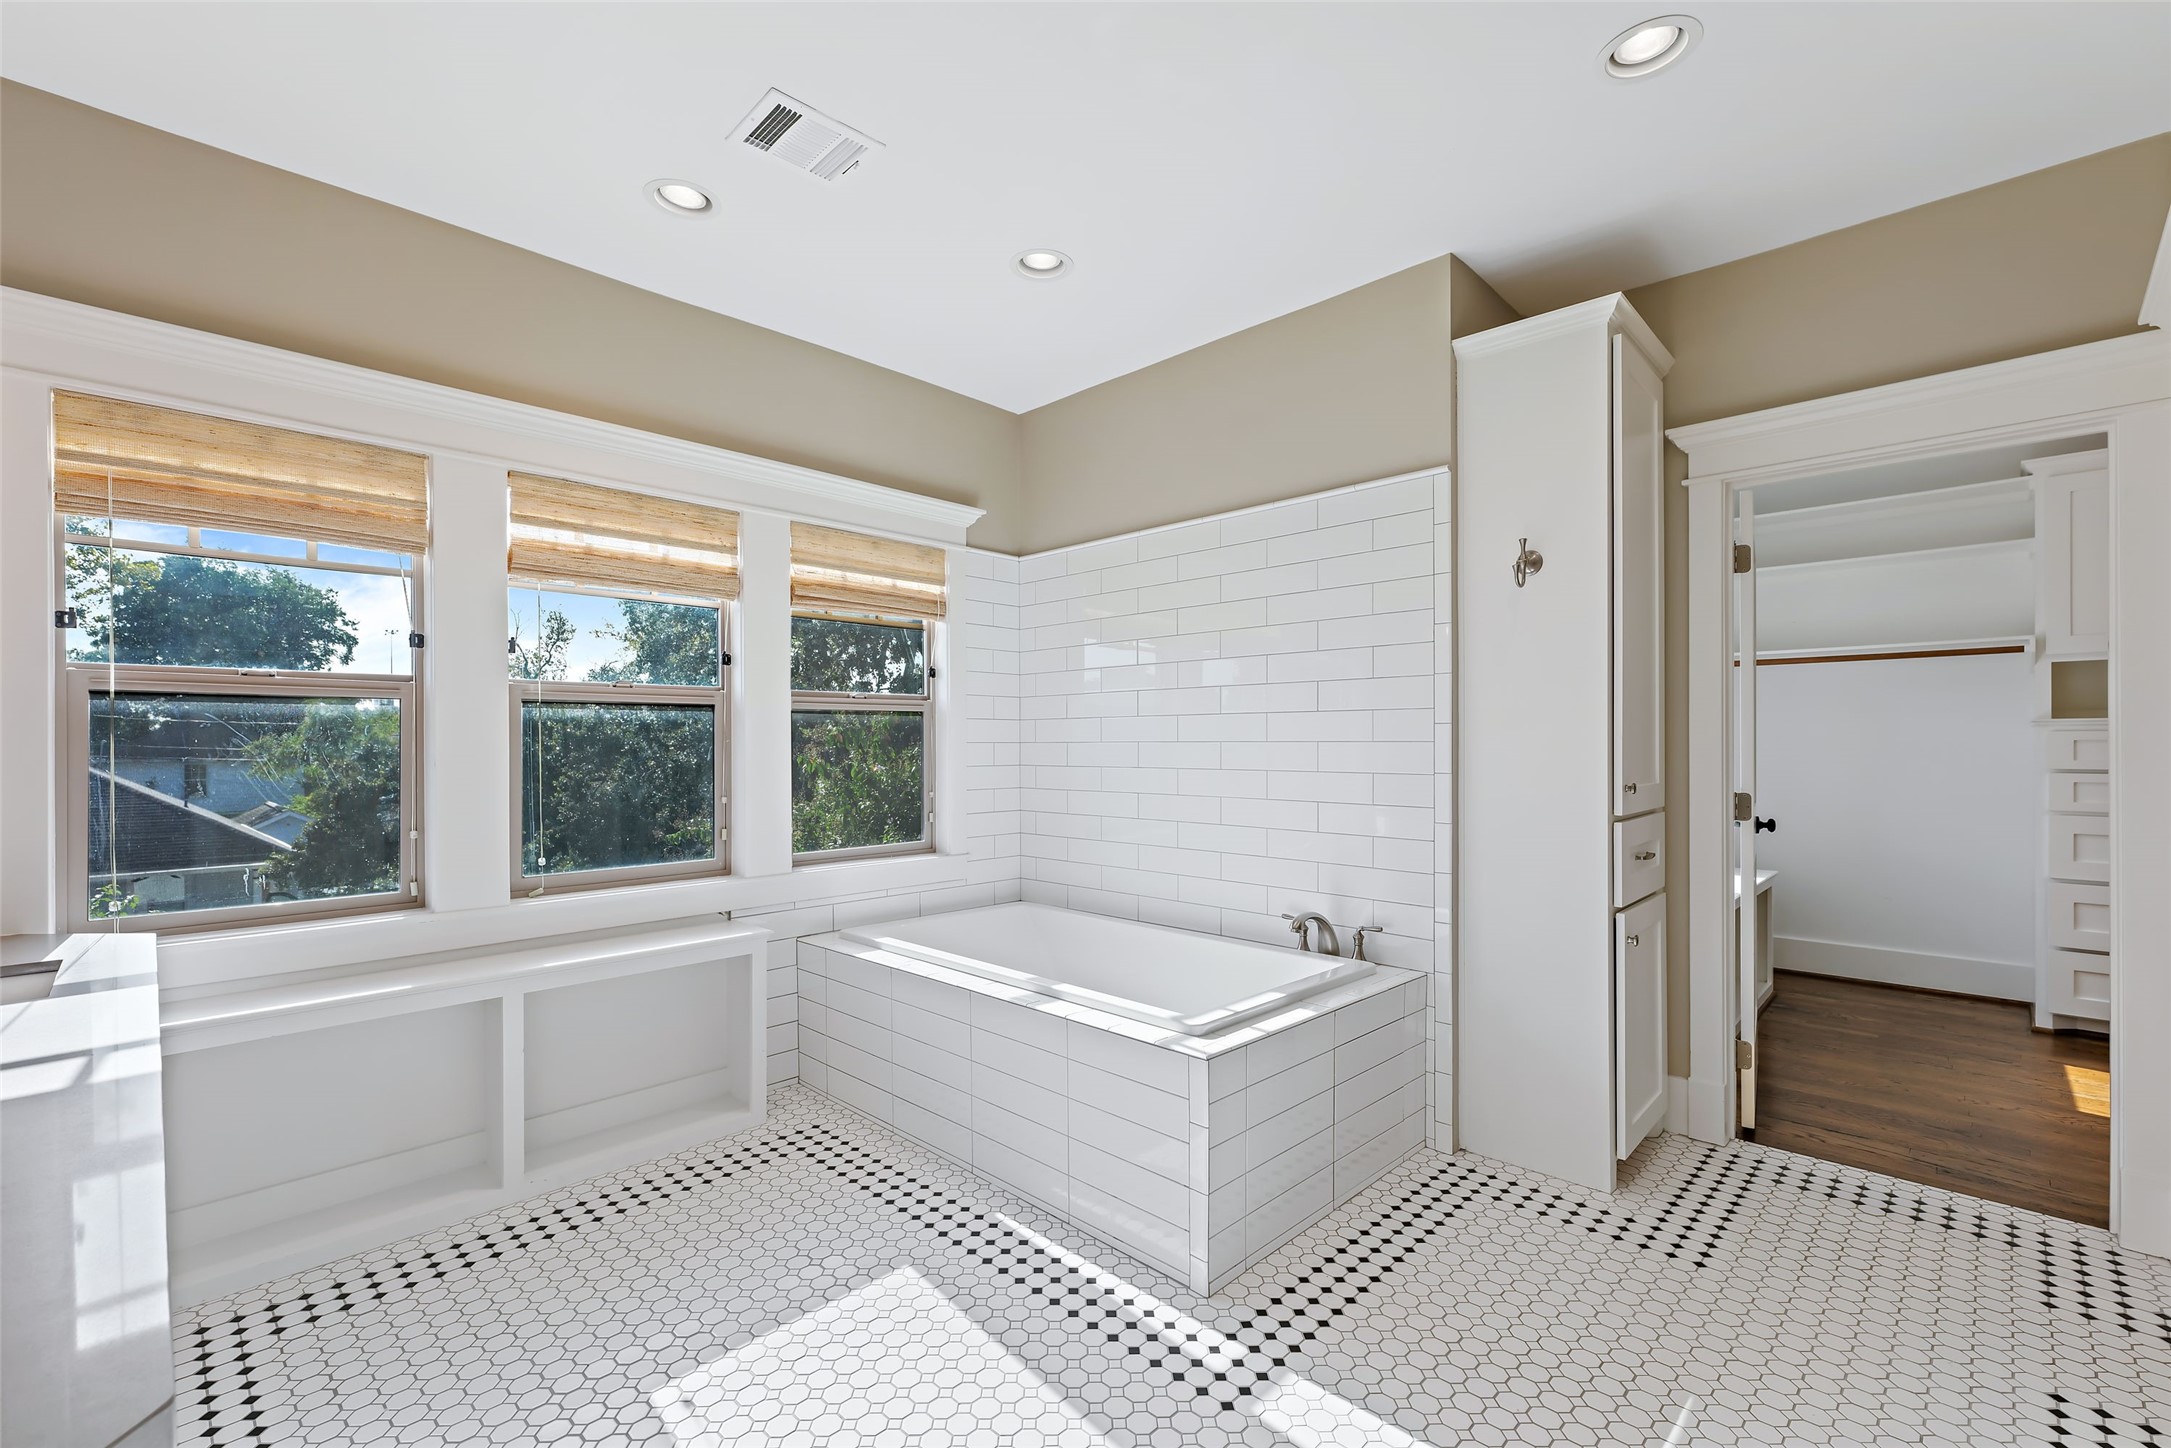 Stunning, light filled primary bath with soaking tub and separate shower, linen cabinet, closet.
